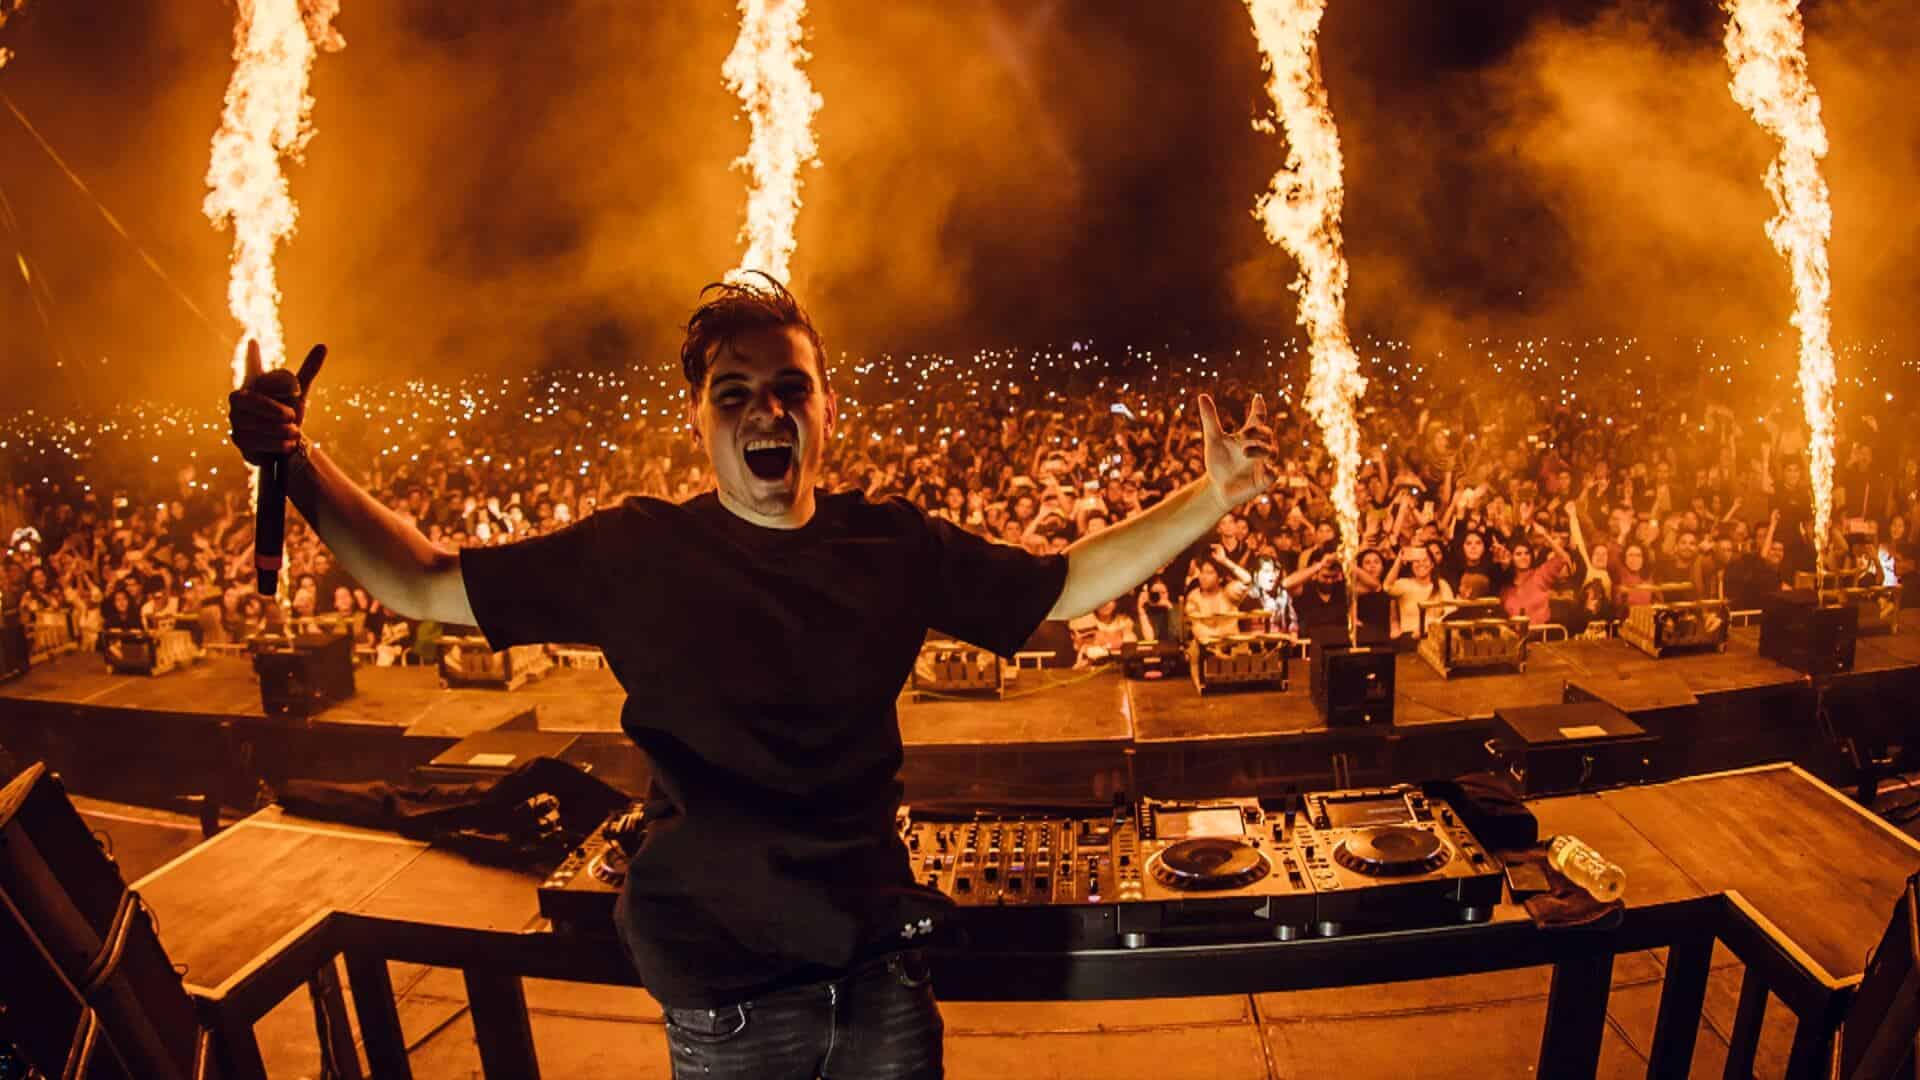 Martin Garrix dominating the Ultra Miami Mainstage, Armin van Buuren X 10 years of ‘This Is What It Feels Like’, The Chemical Brothers new single, ‘No Reason’ - WTEMN [2023-03 (Week #12)]